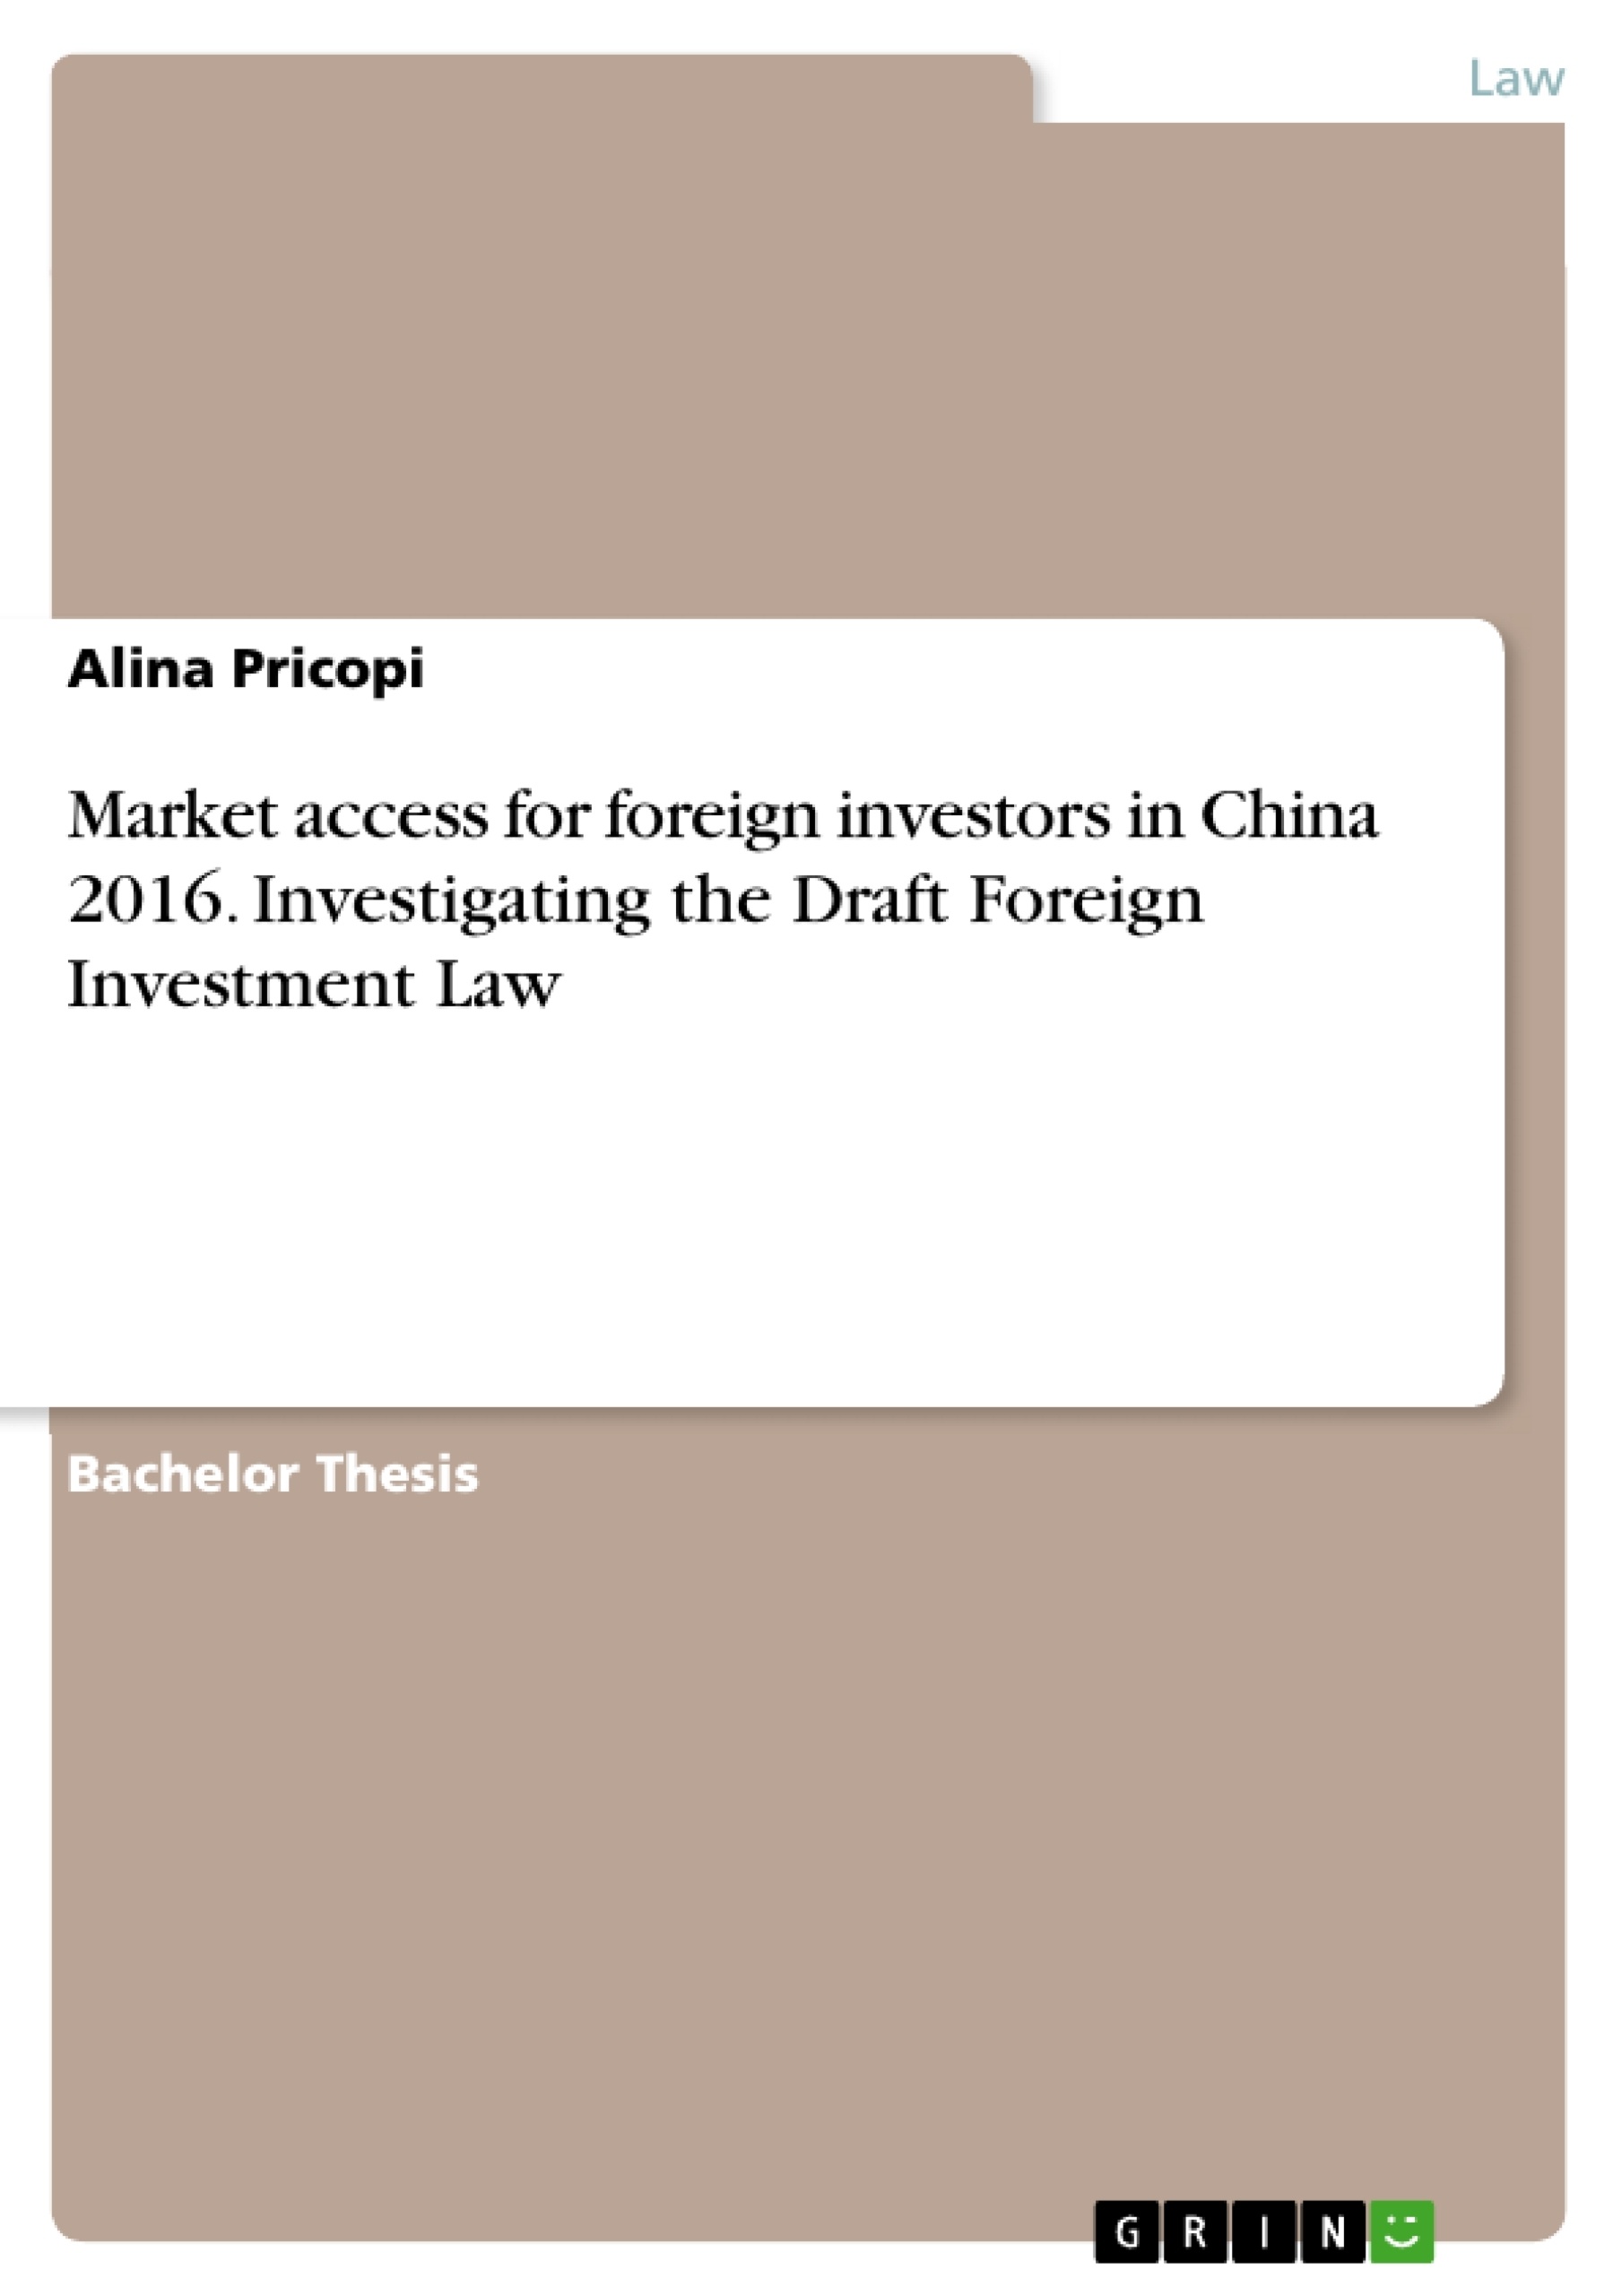 Title: Market access for foreign investors in China 2016. Investigating the Draft Foreign Investment Law